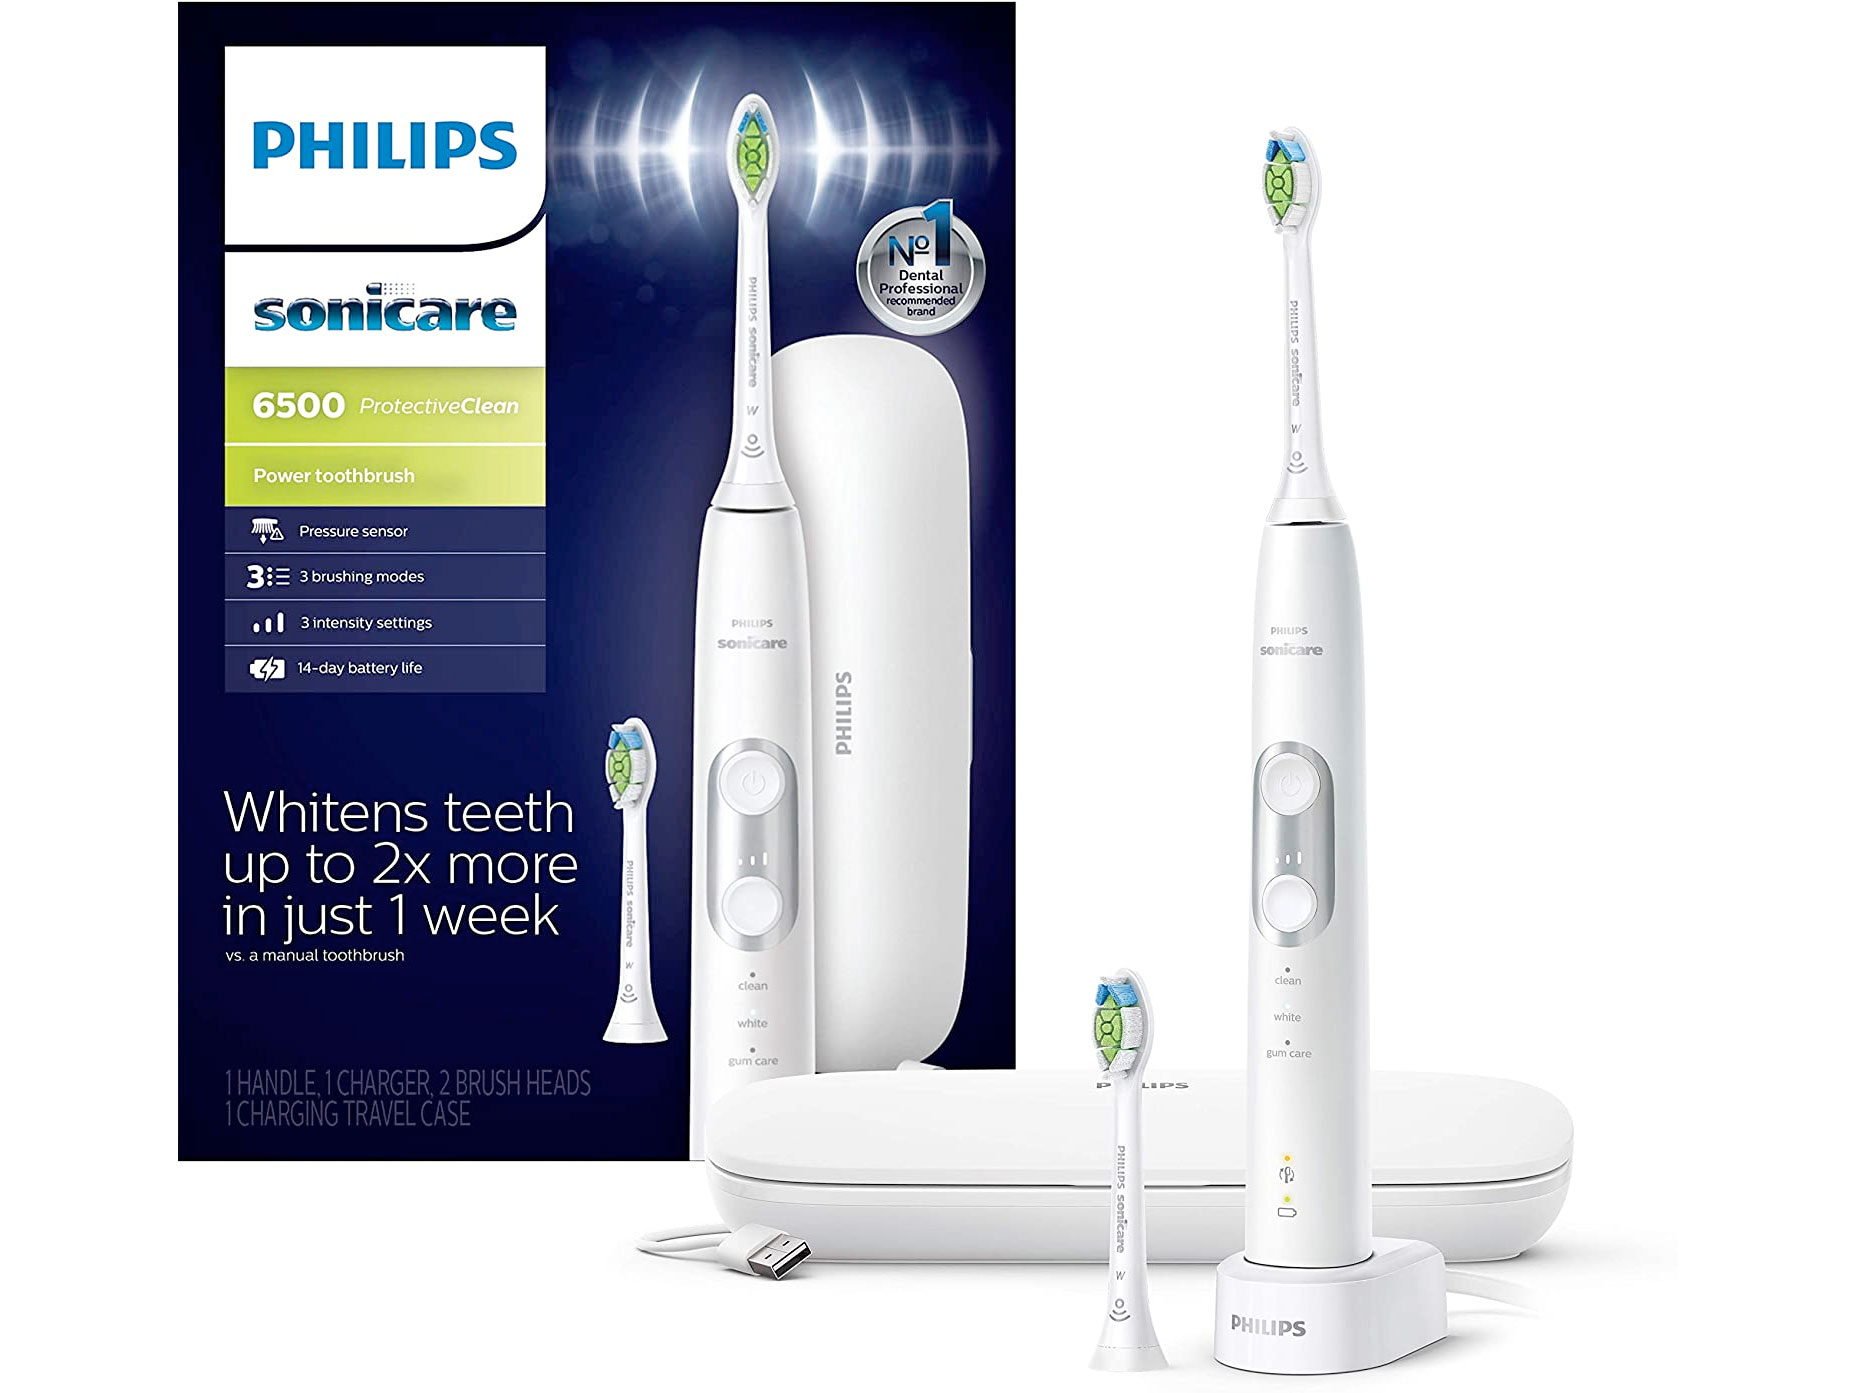 Amazon：Philips Sonicare ProtectiveClean 6500電動牙刷只賣$119.95